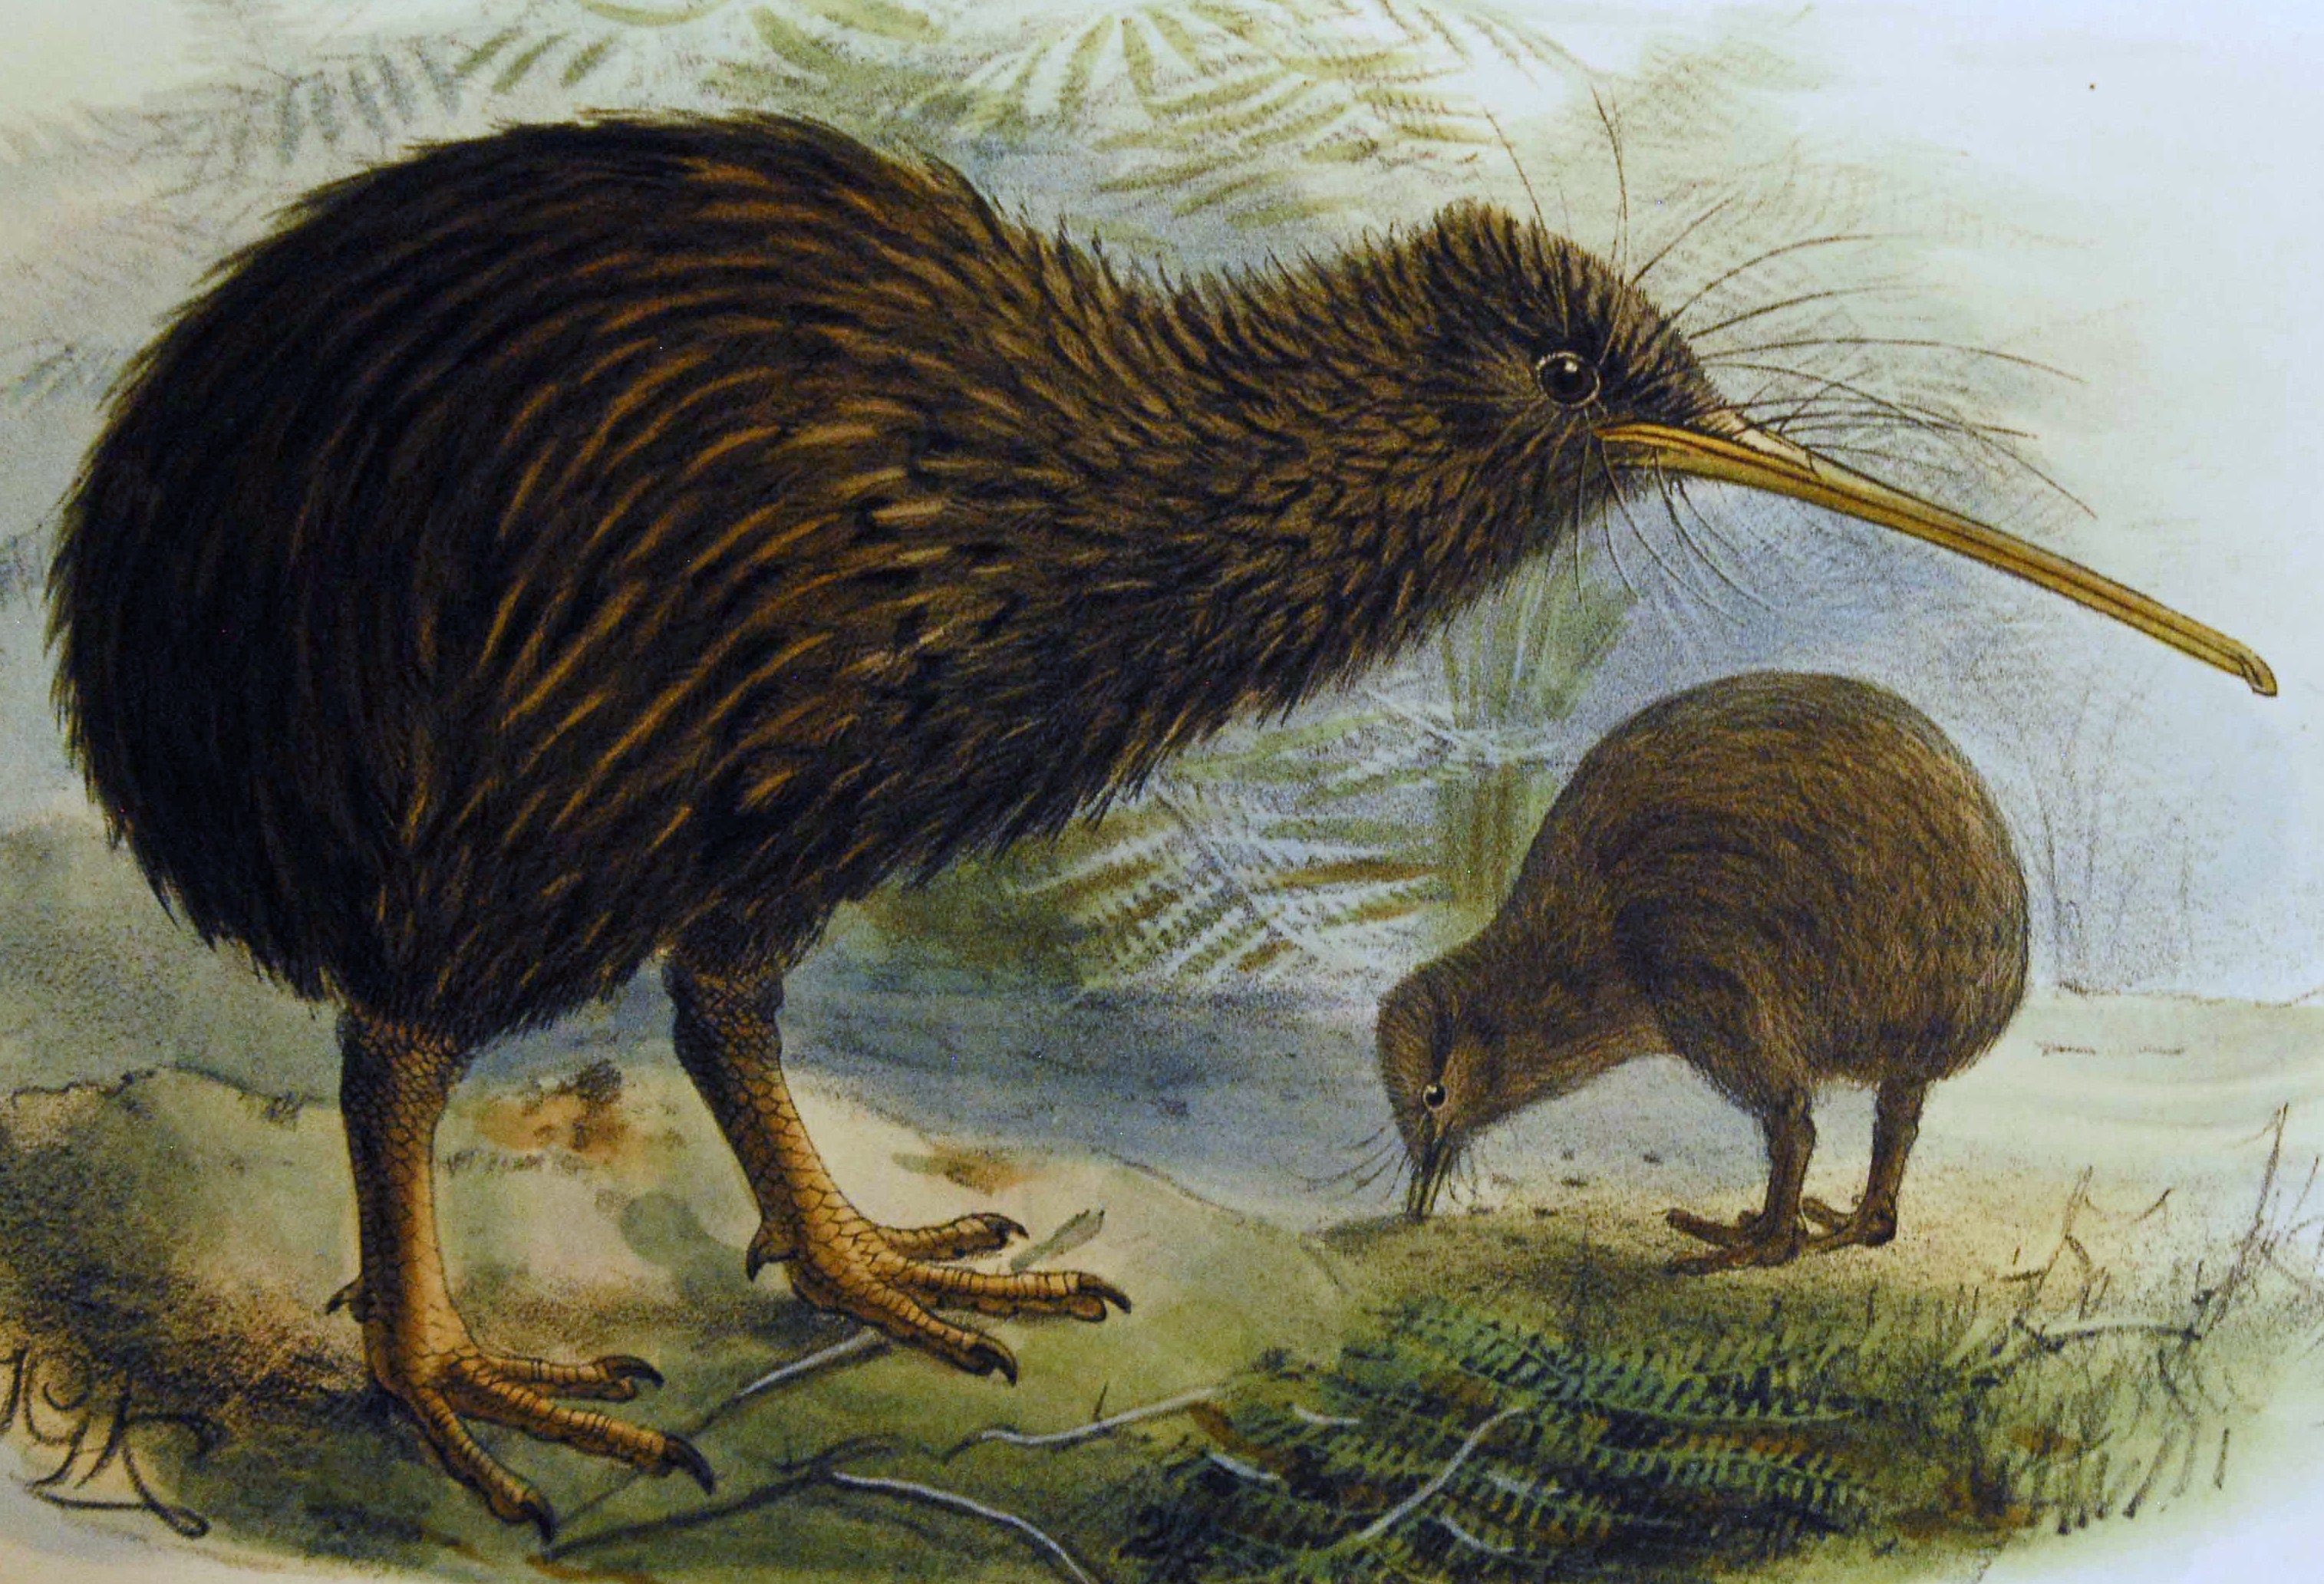 Time to learn about the kiwi bird!